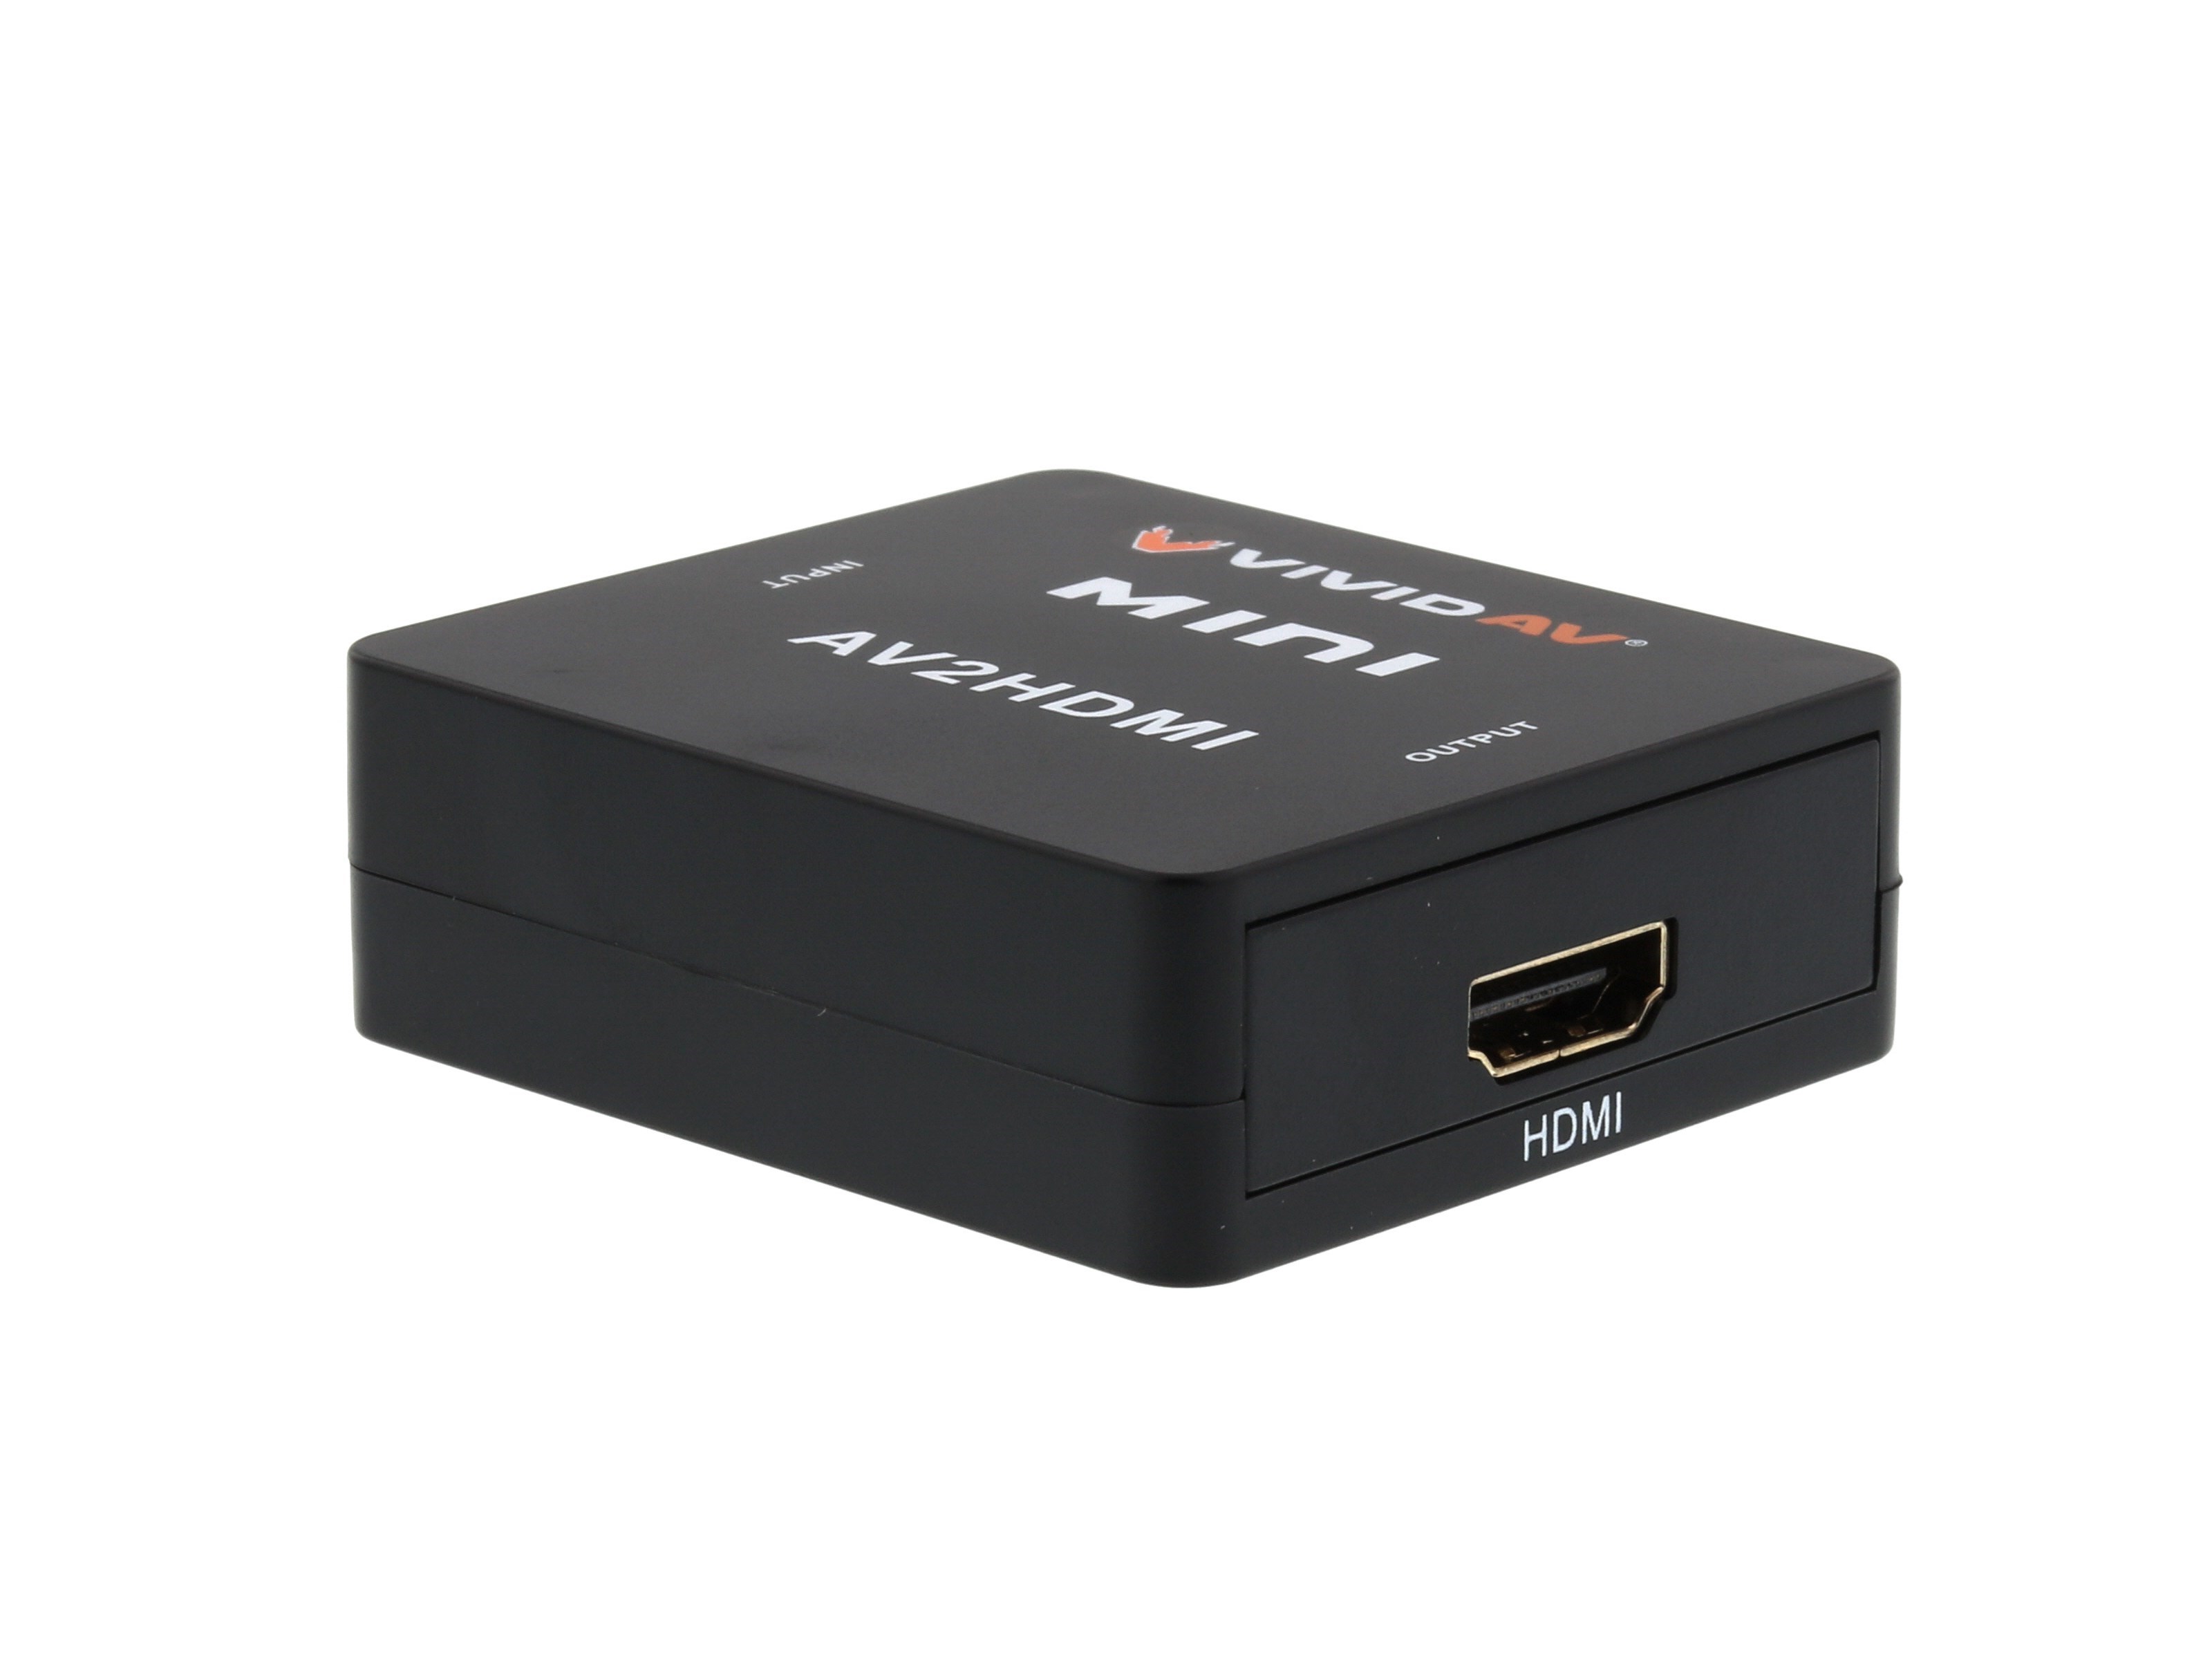 RCA HDMI Video Converter - Black at Cables N More